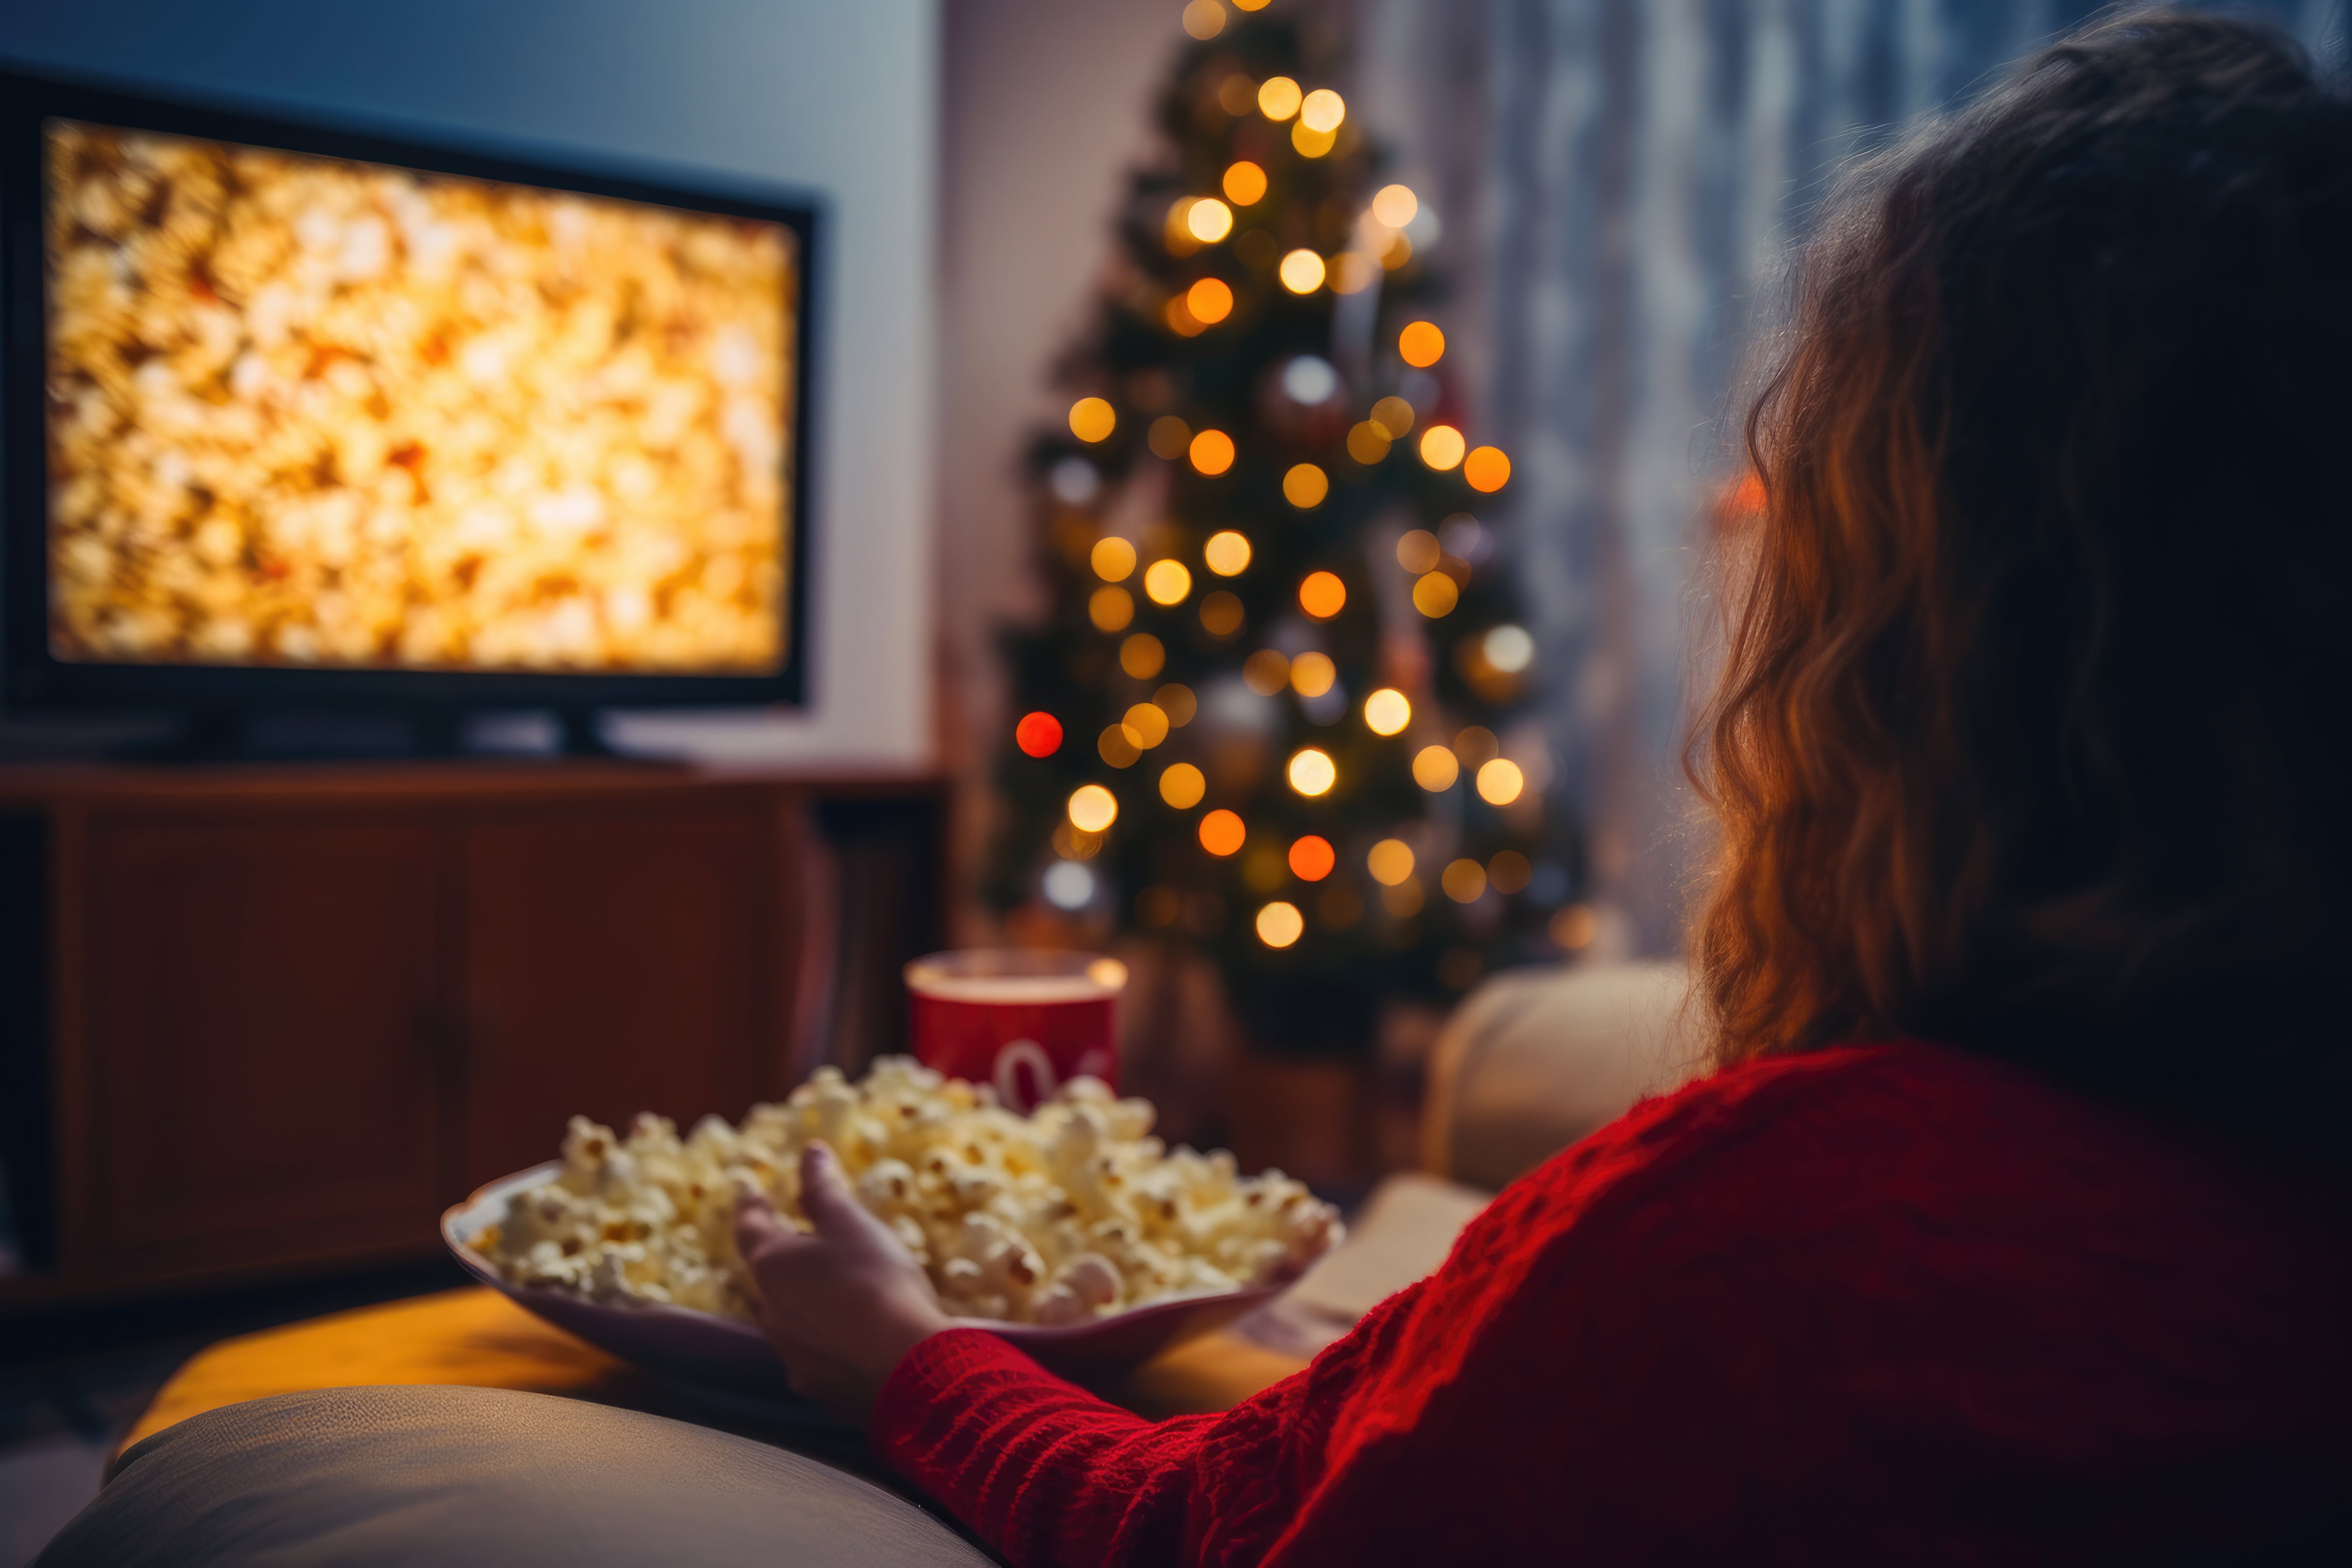 A lady sat watching a Christmas movie with a huge bowl of popcorn at the ready and fairy lights twinkling on the tree in the background